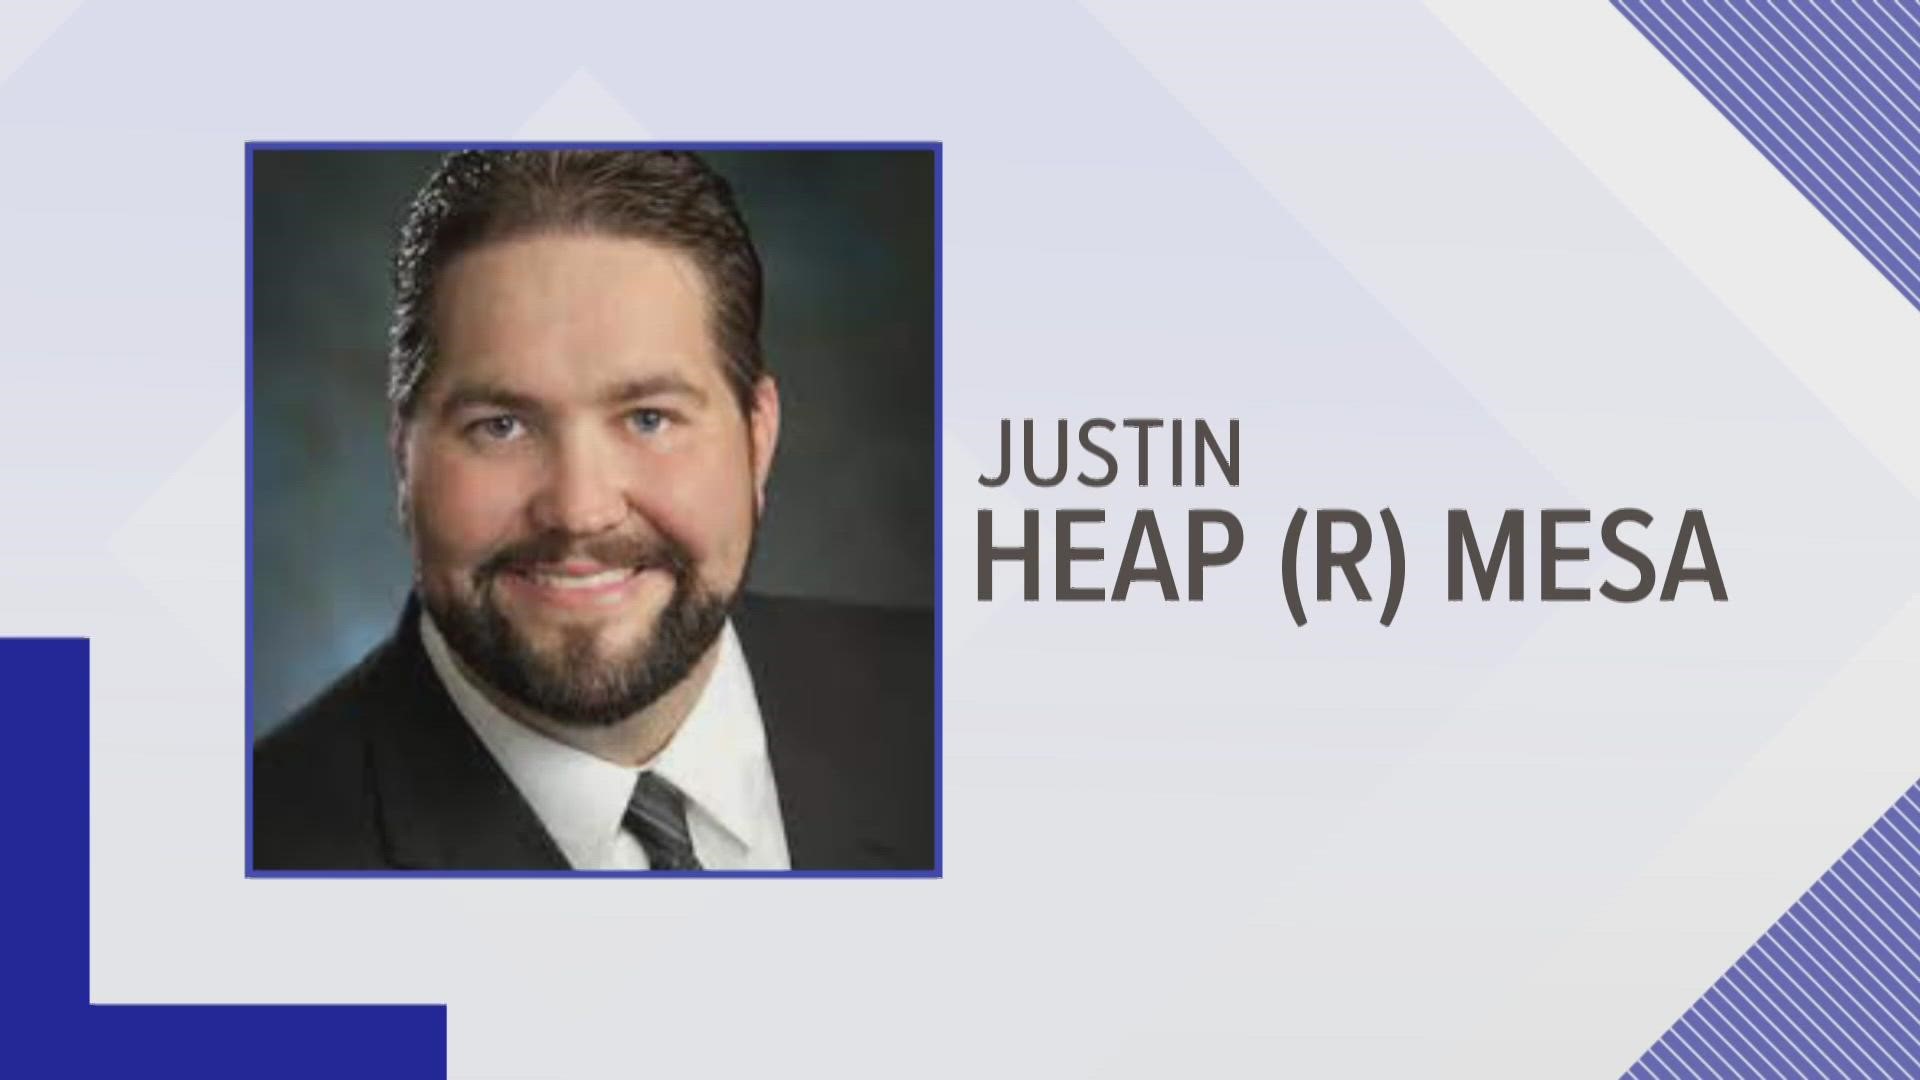 In February, Arizona state Representative Justin Heap of Mesa defended an email he sent to a lobbyist that inquired about donations to his 2022 election campaign.